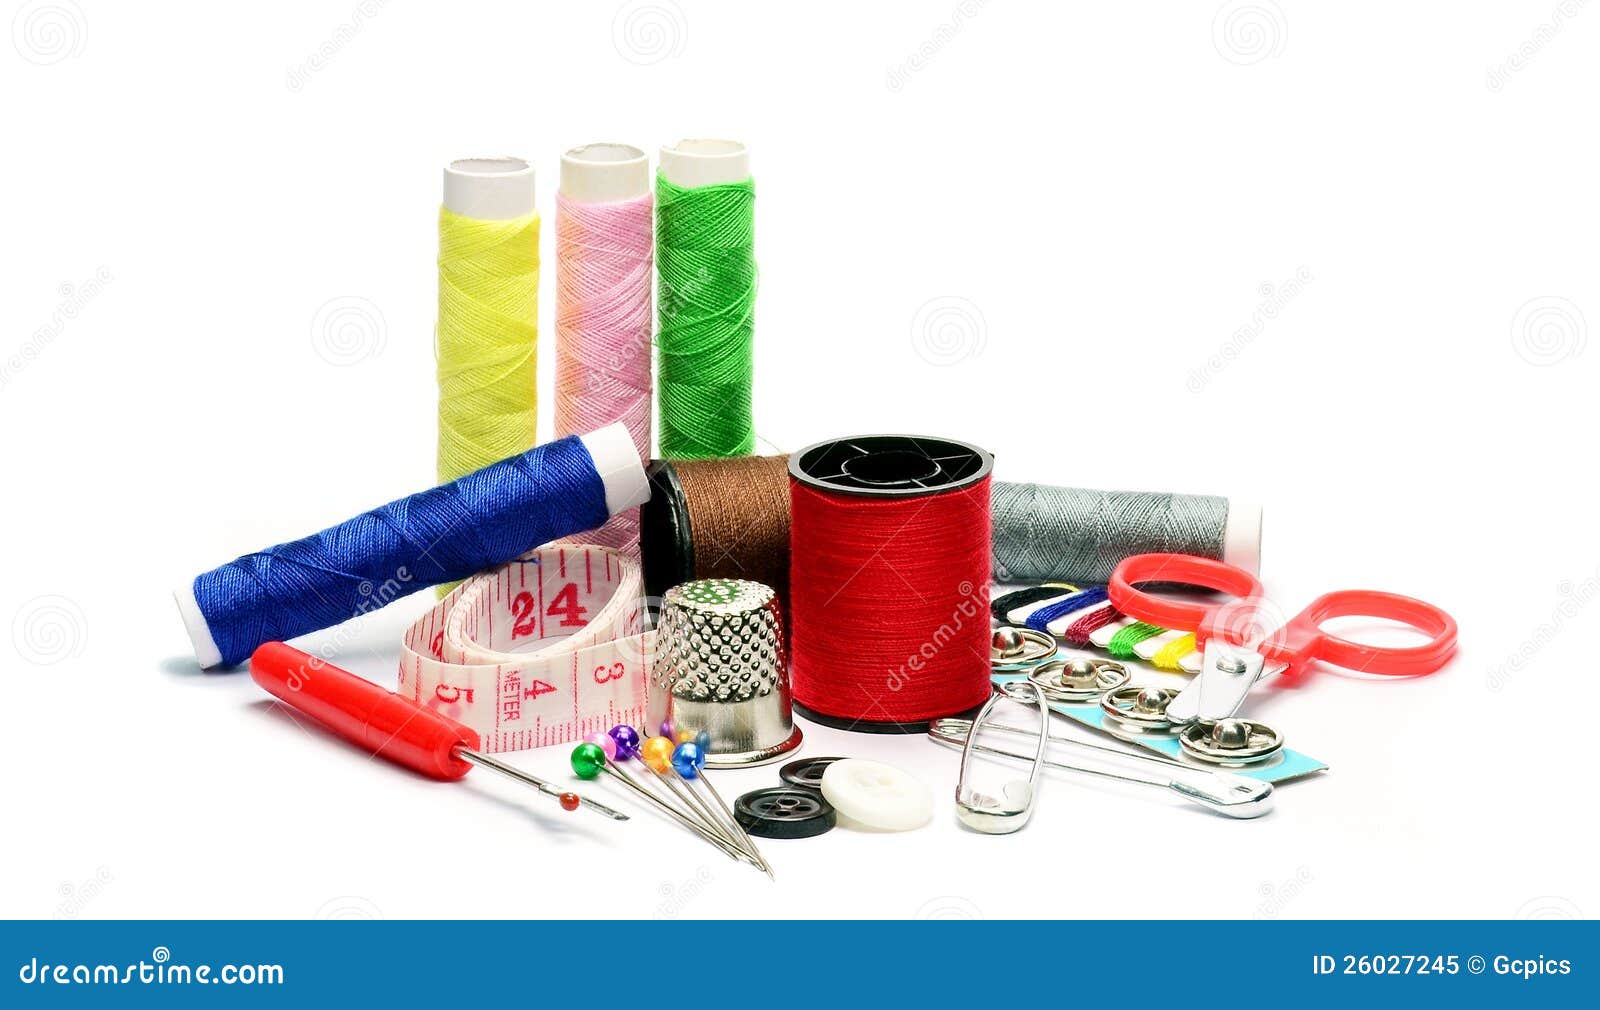 sewing dressmaking accessories